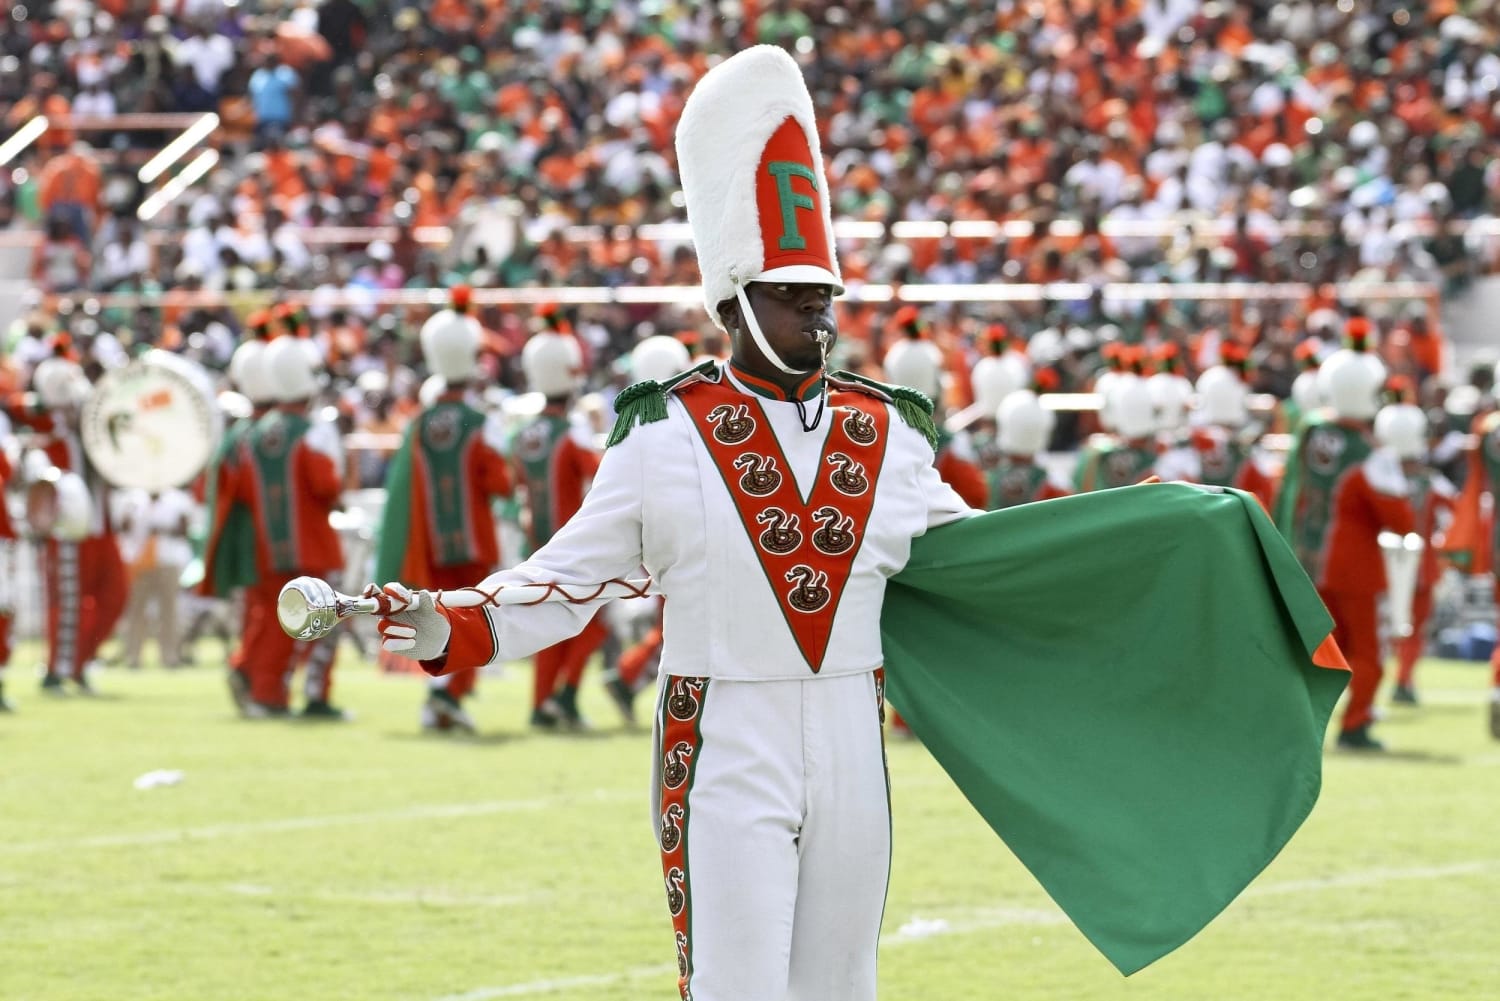 FAMU Adjusts To Games Without Marching Band After Hazing Death : NPR